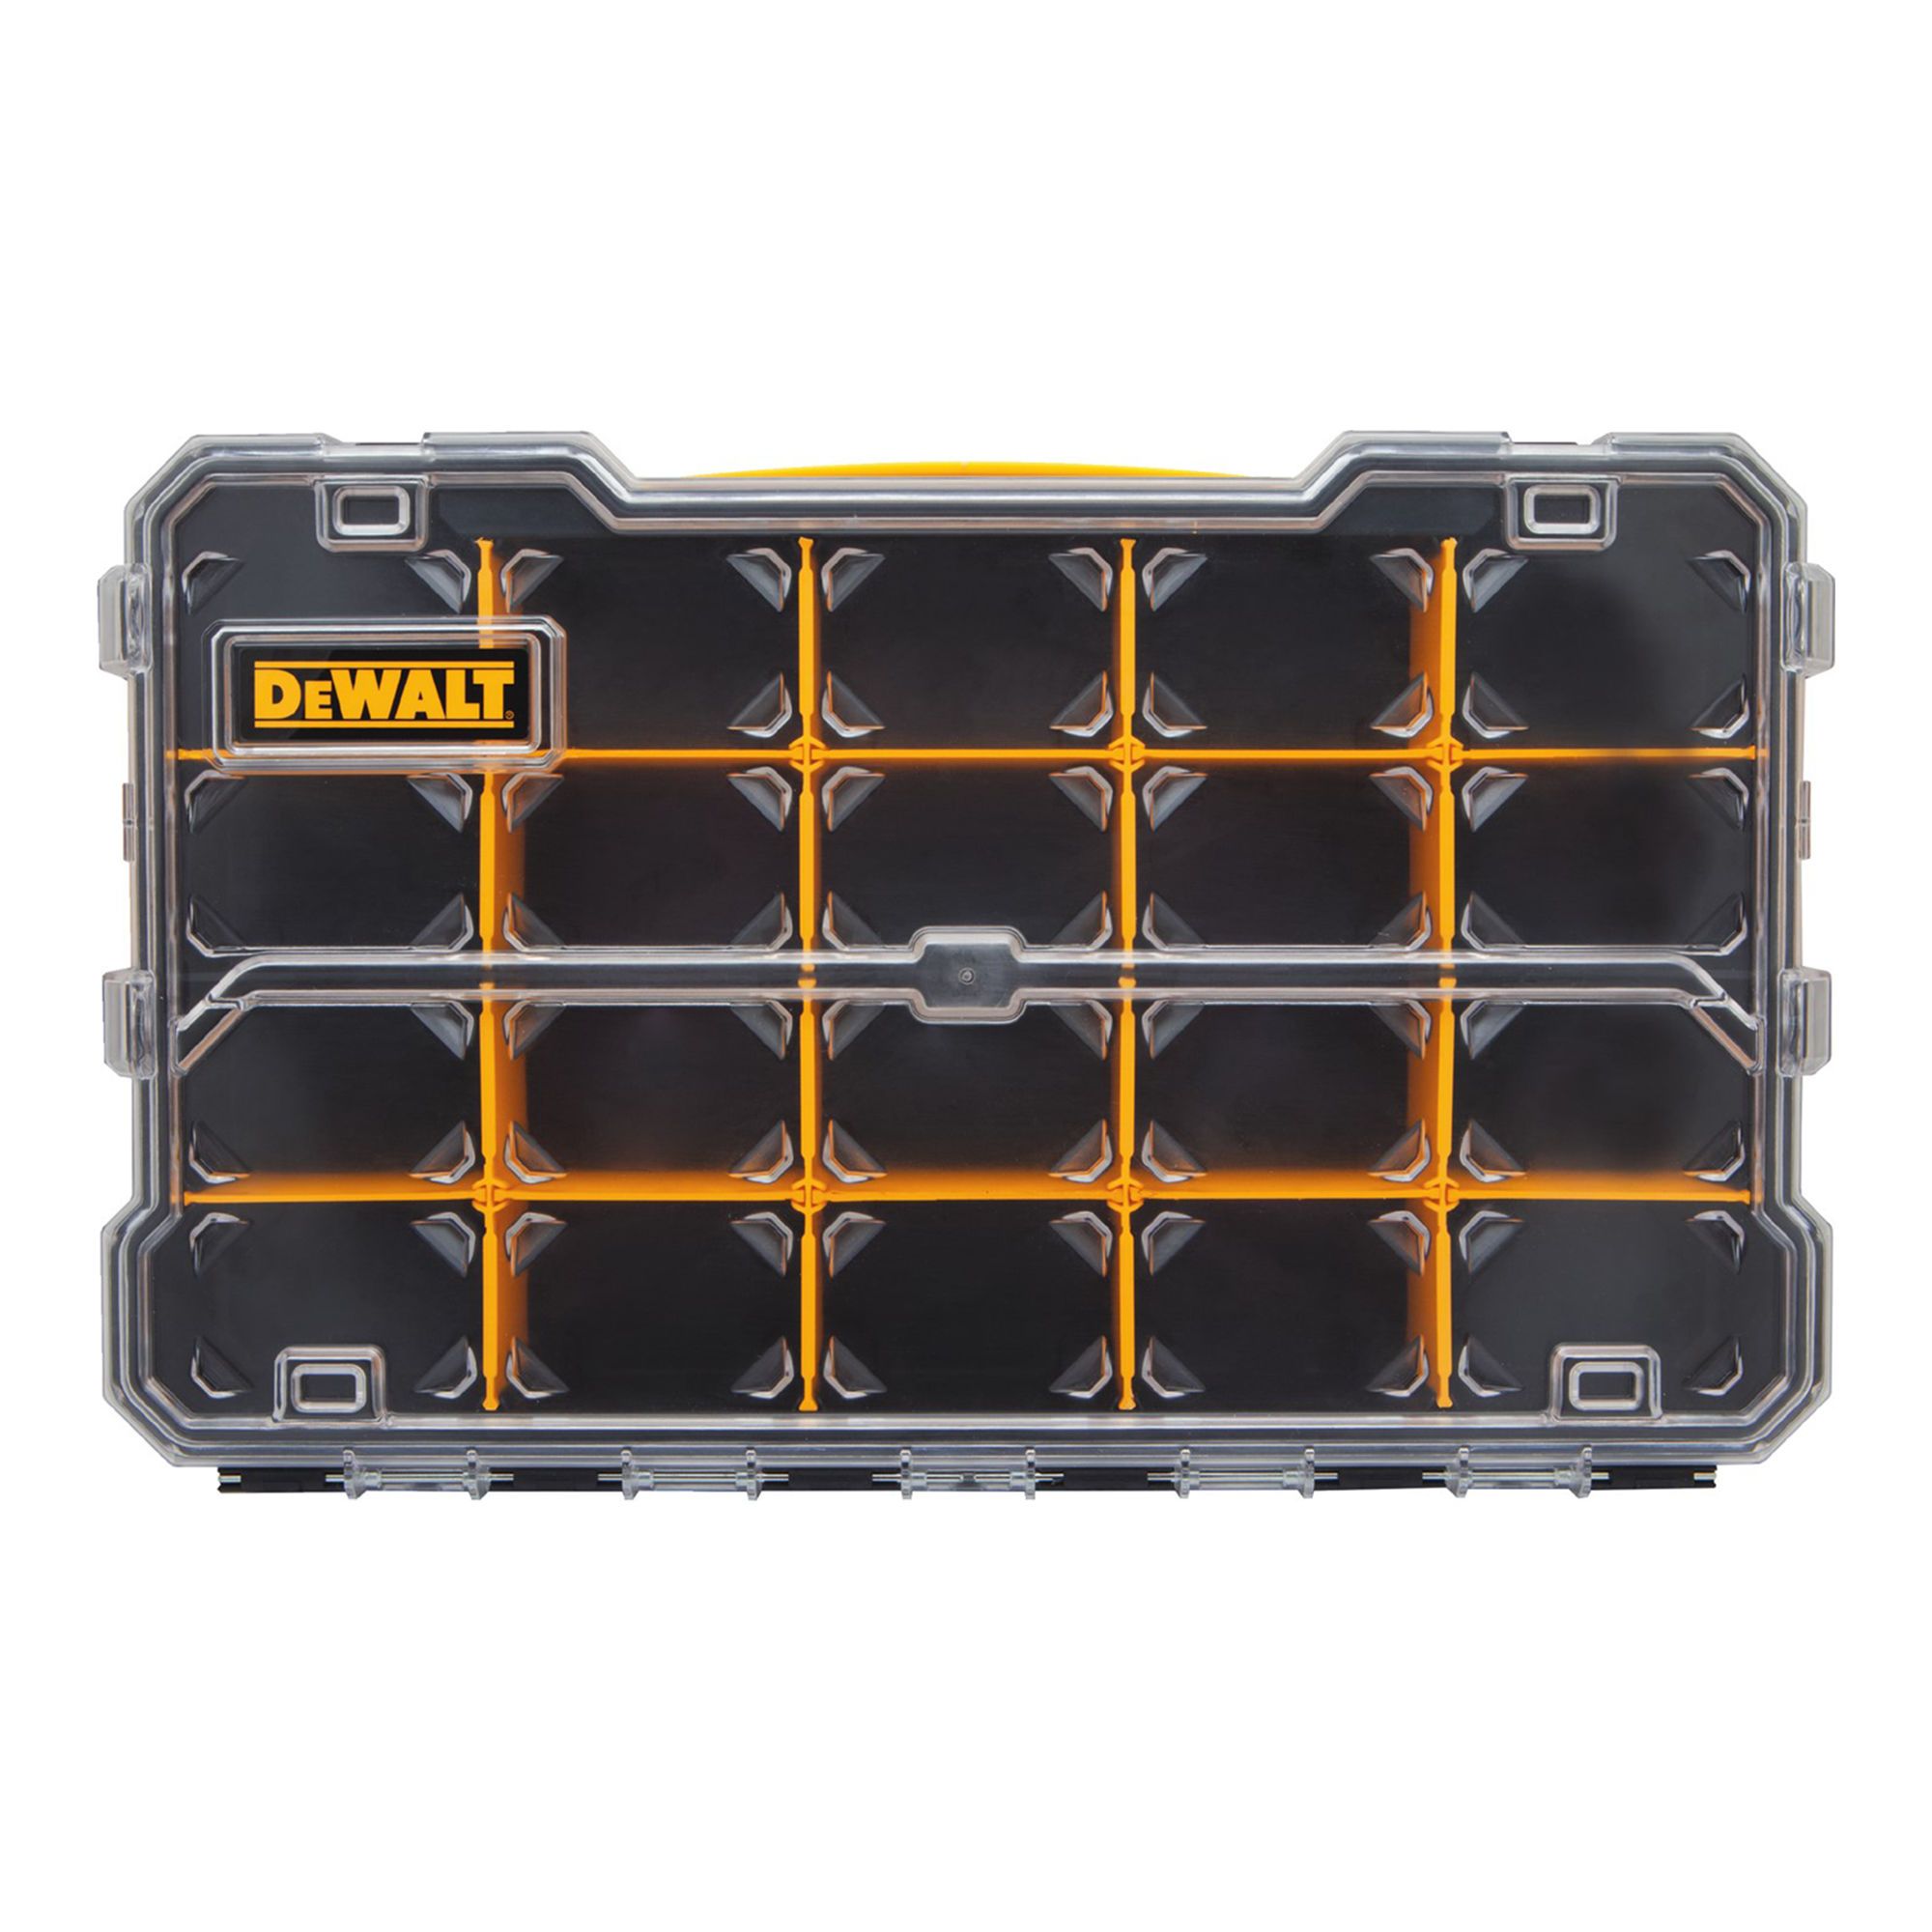 Organizer - 10 Compartments - Black and Yellow from DEWALT